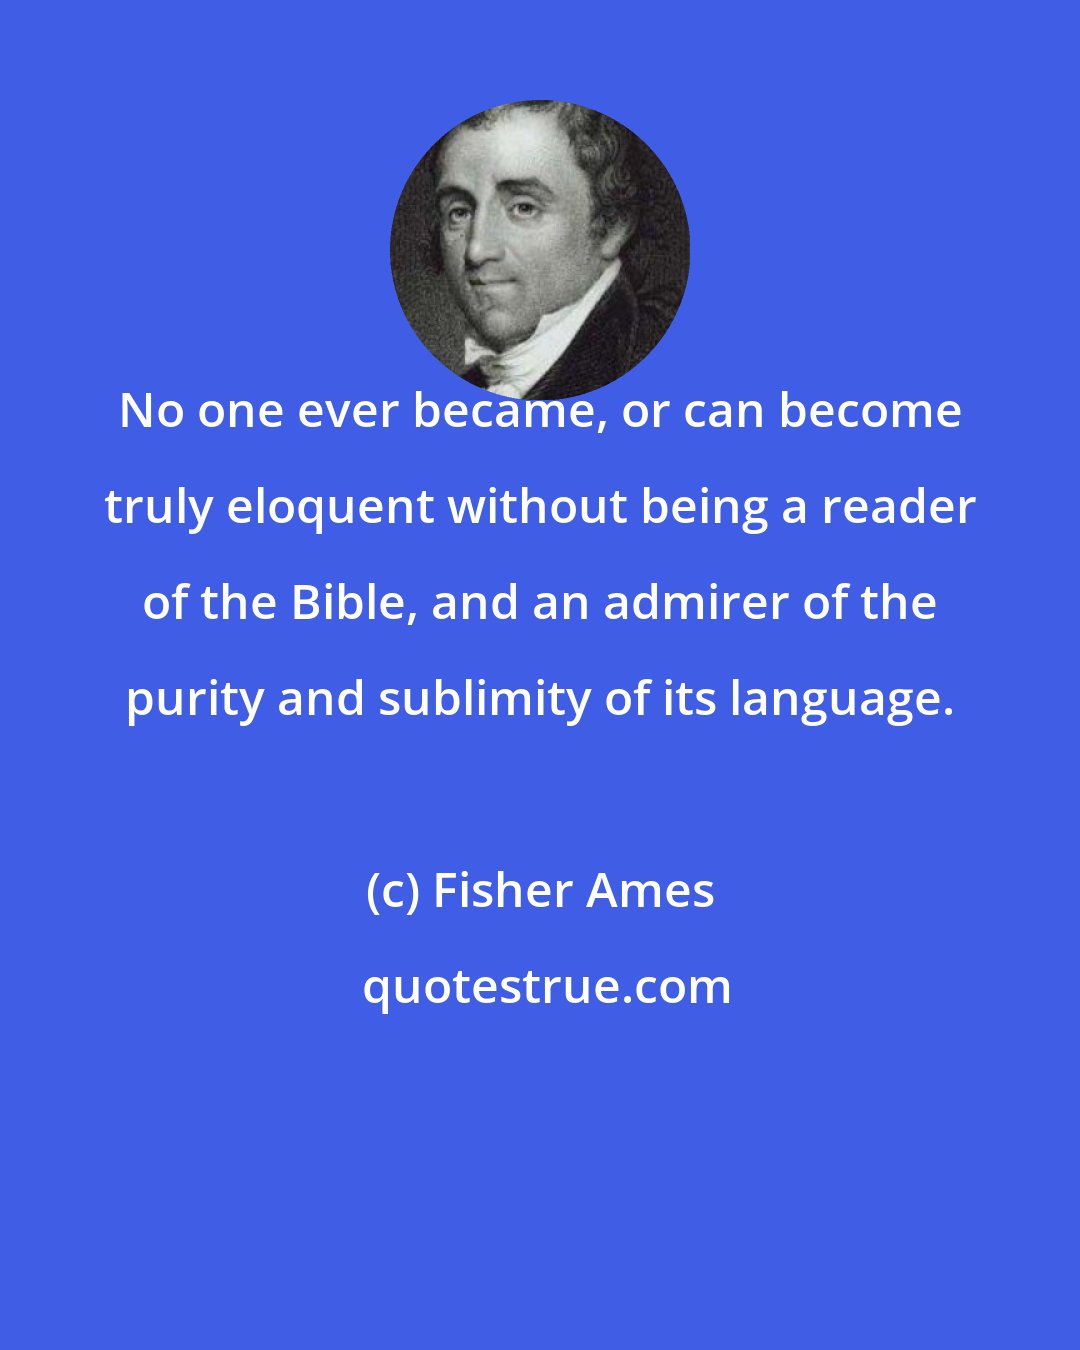 Fisher Ames: No one ever became, or can become truly eloquent without being a reader of the Bible, and an admirer of the purity and sublimity of its language.